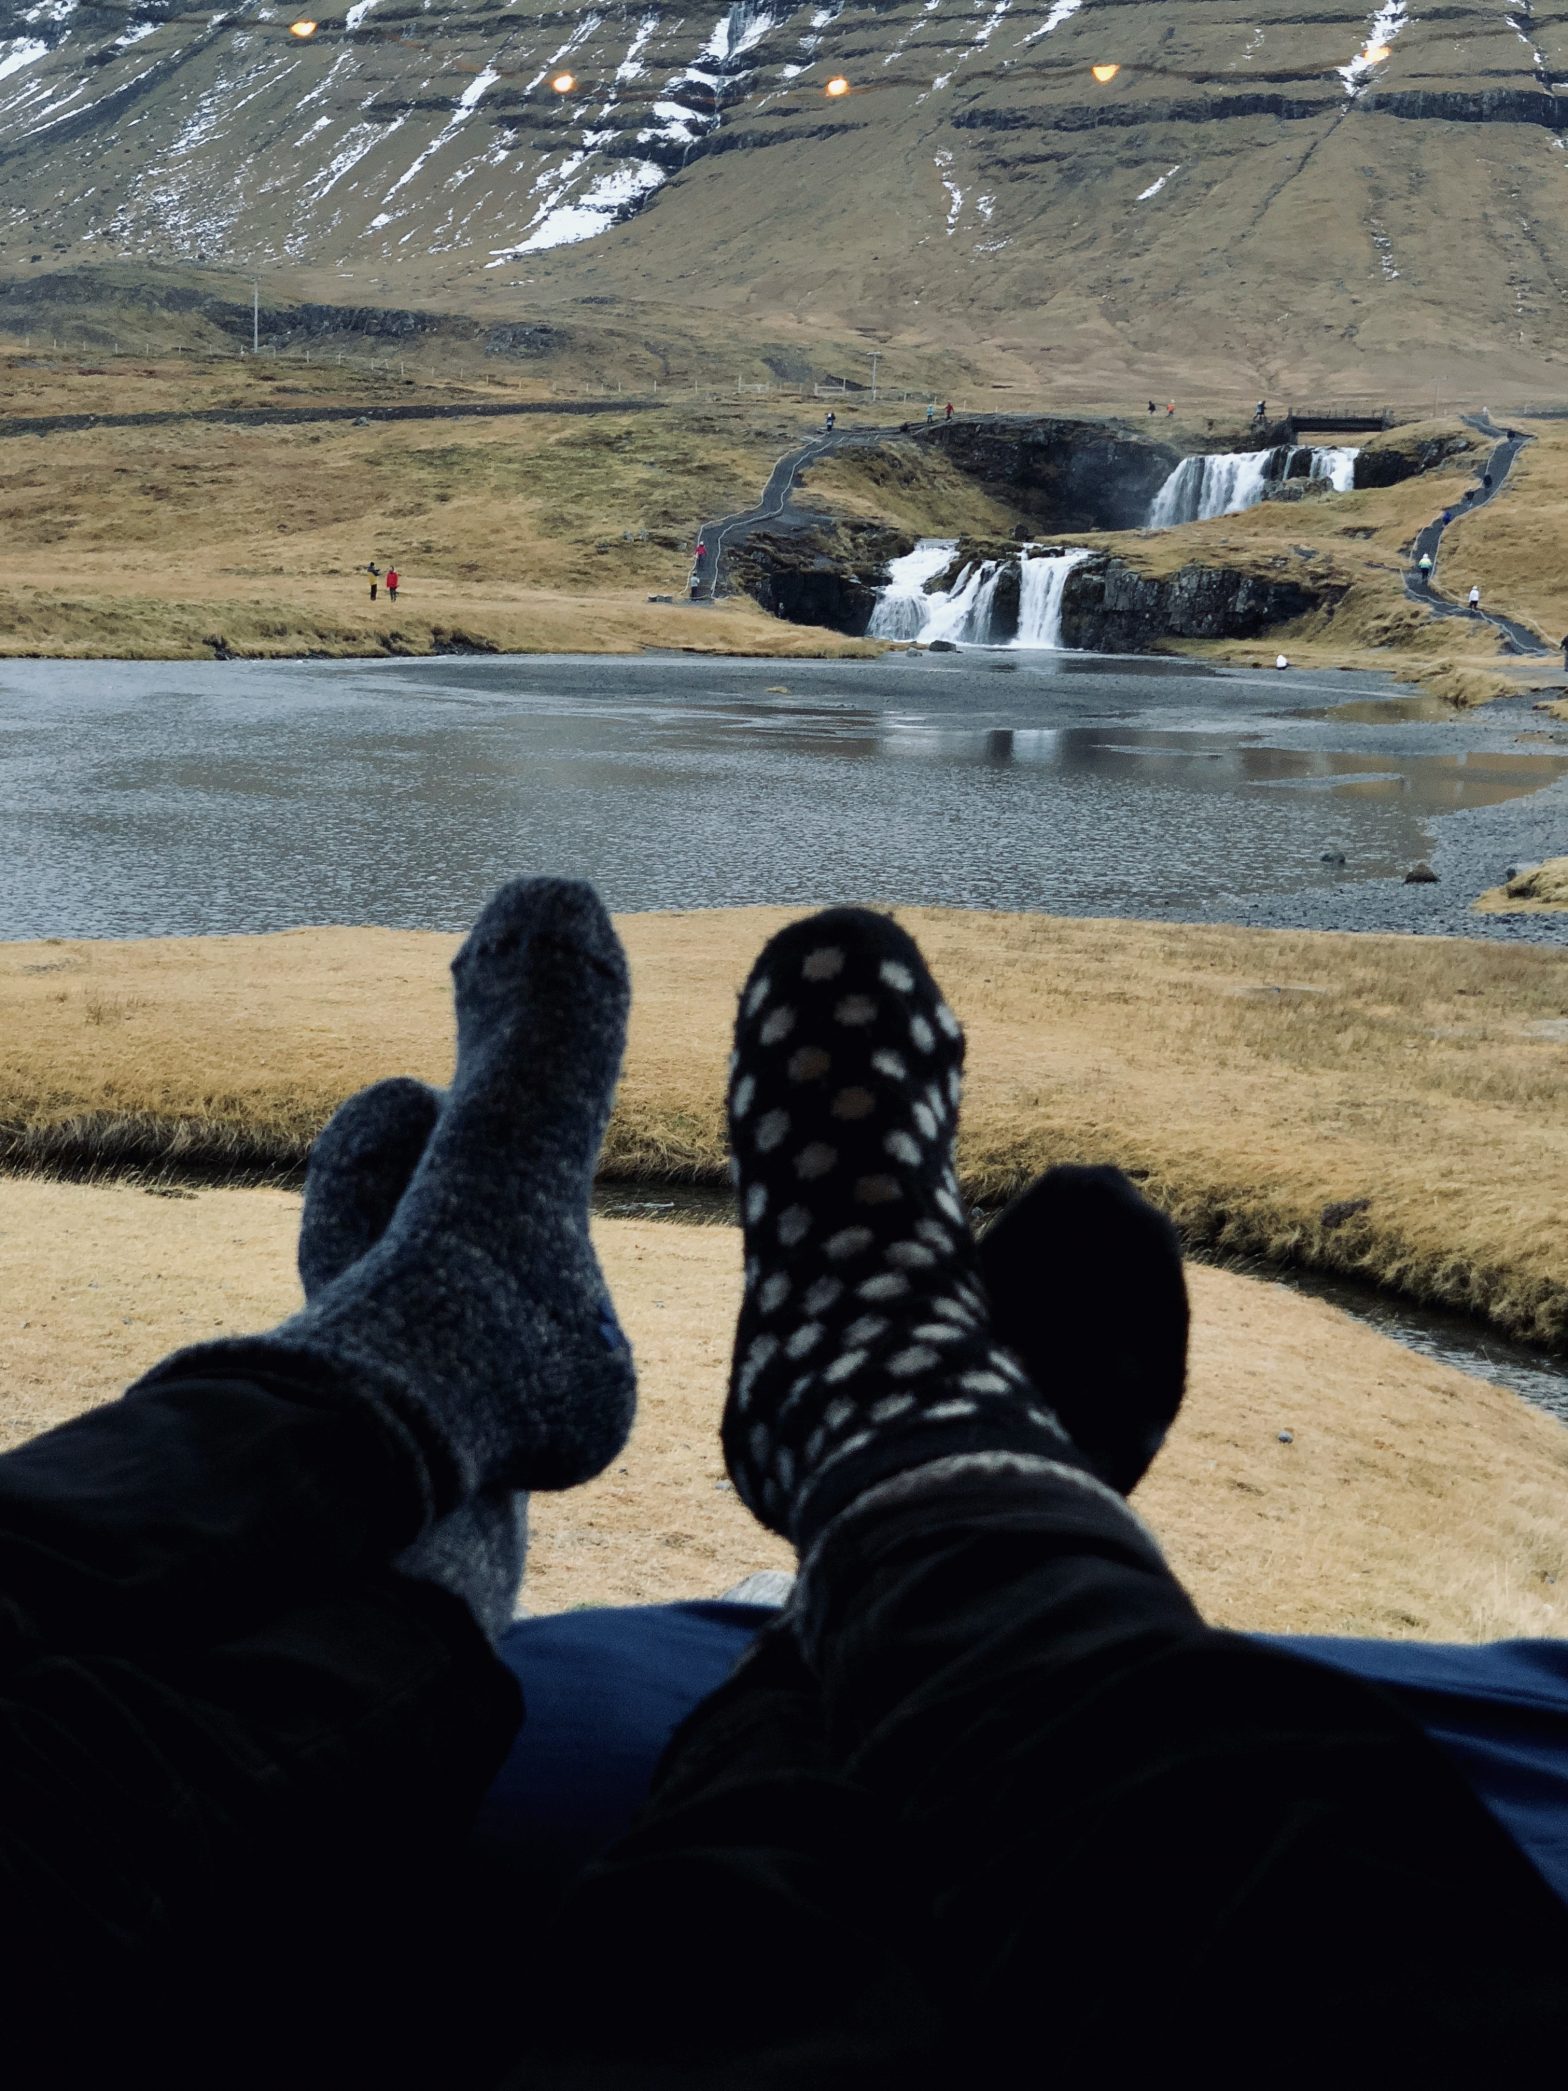 PEOPLE HAVING FUN CAMPING IN ICELAND - PICTURES - Camping Iceland